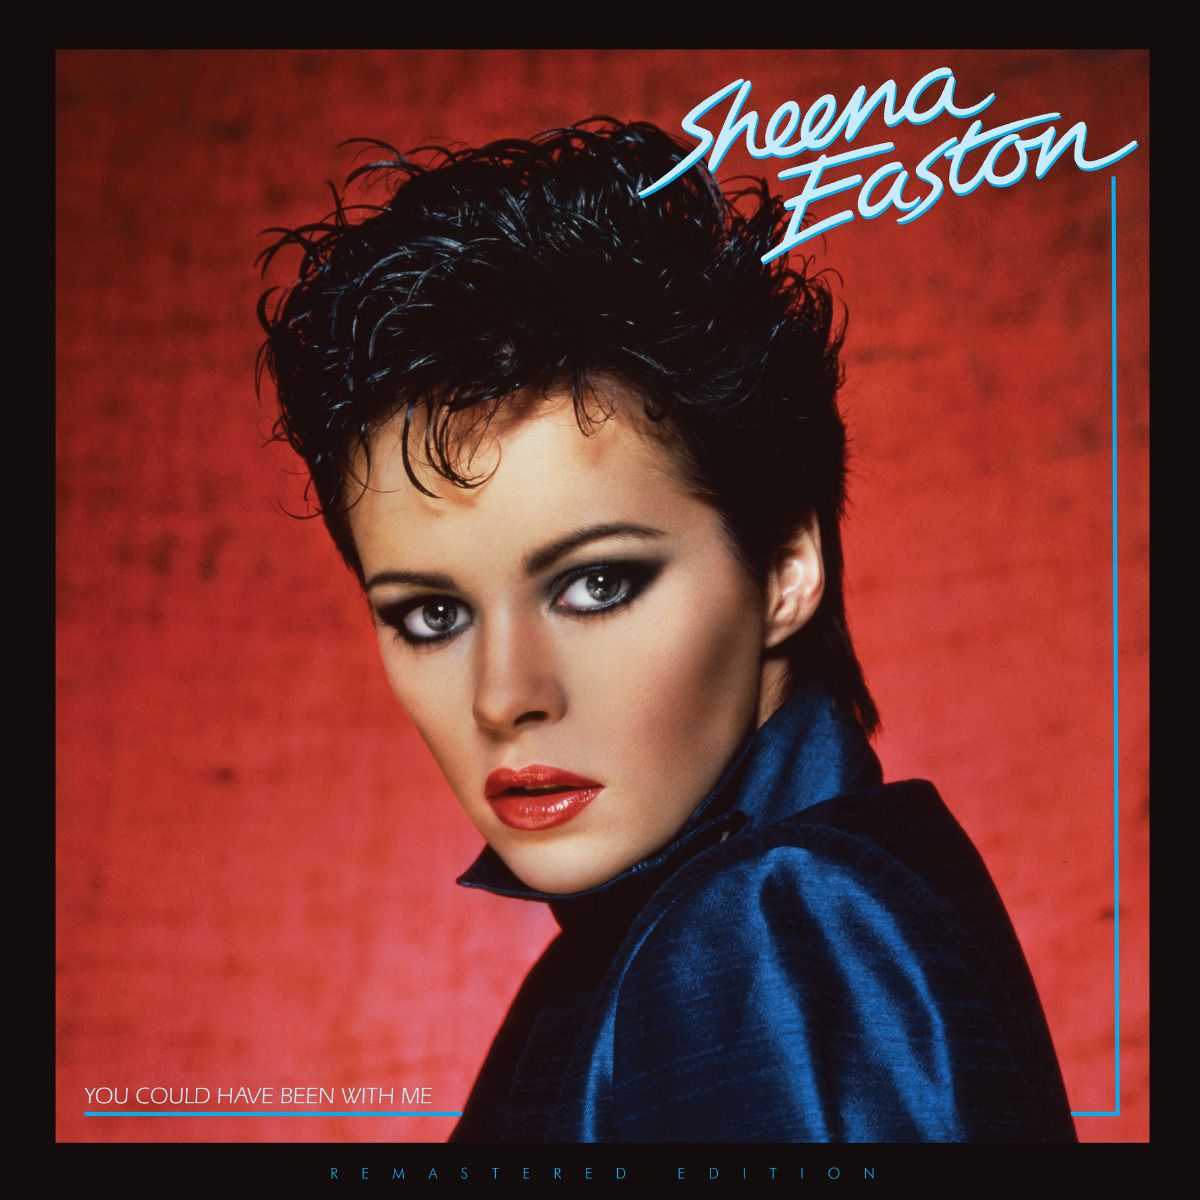 SHEENA EASTON / シーナ・イーストン / YOU COULD HAVE BEEN WITH ME (12"VINYL EDITION)